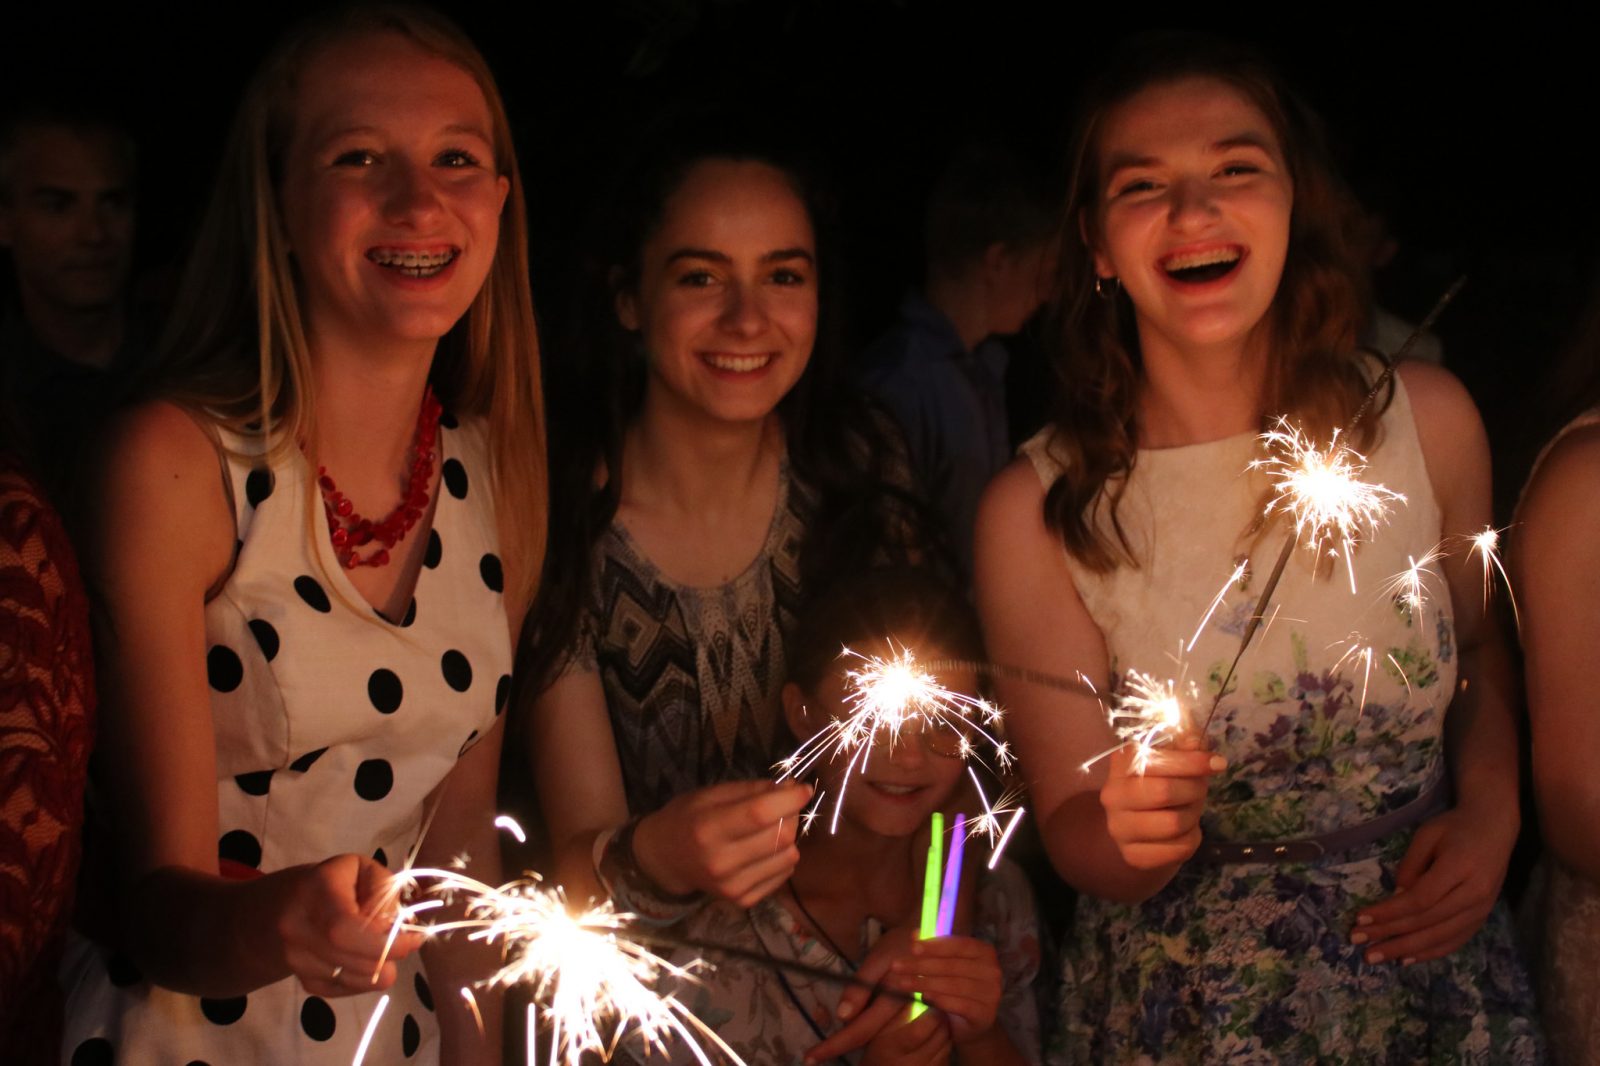 Smiling online Christian homeschooling students are gently illuminated by sparklers at a celebration